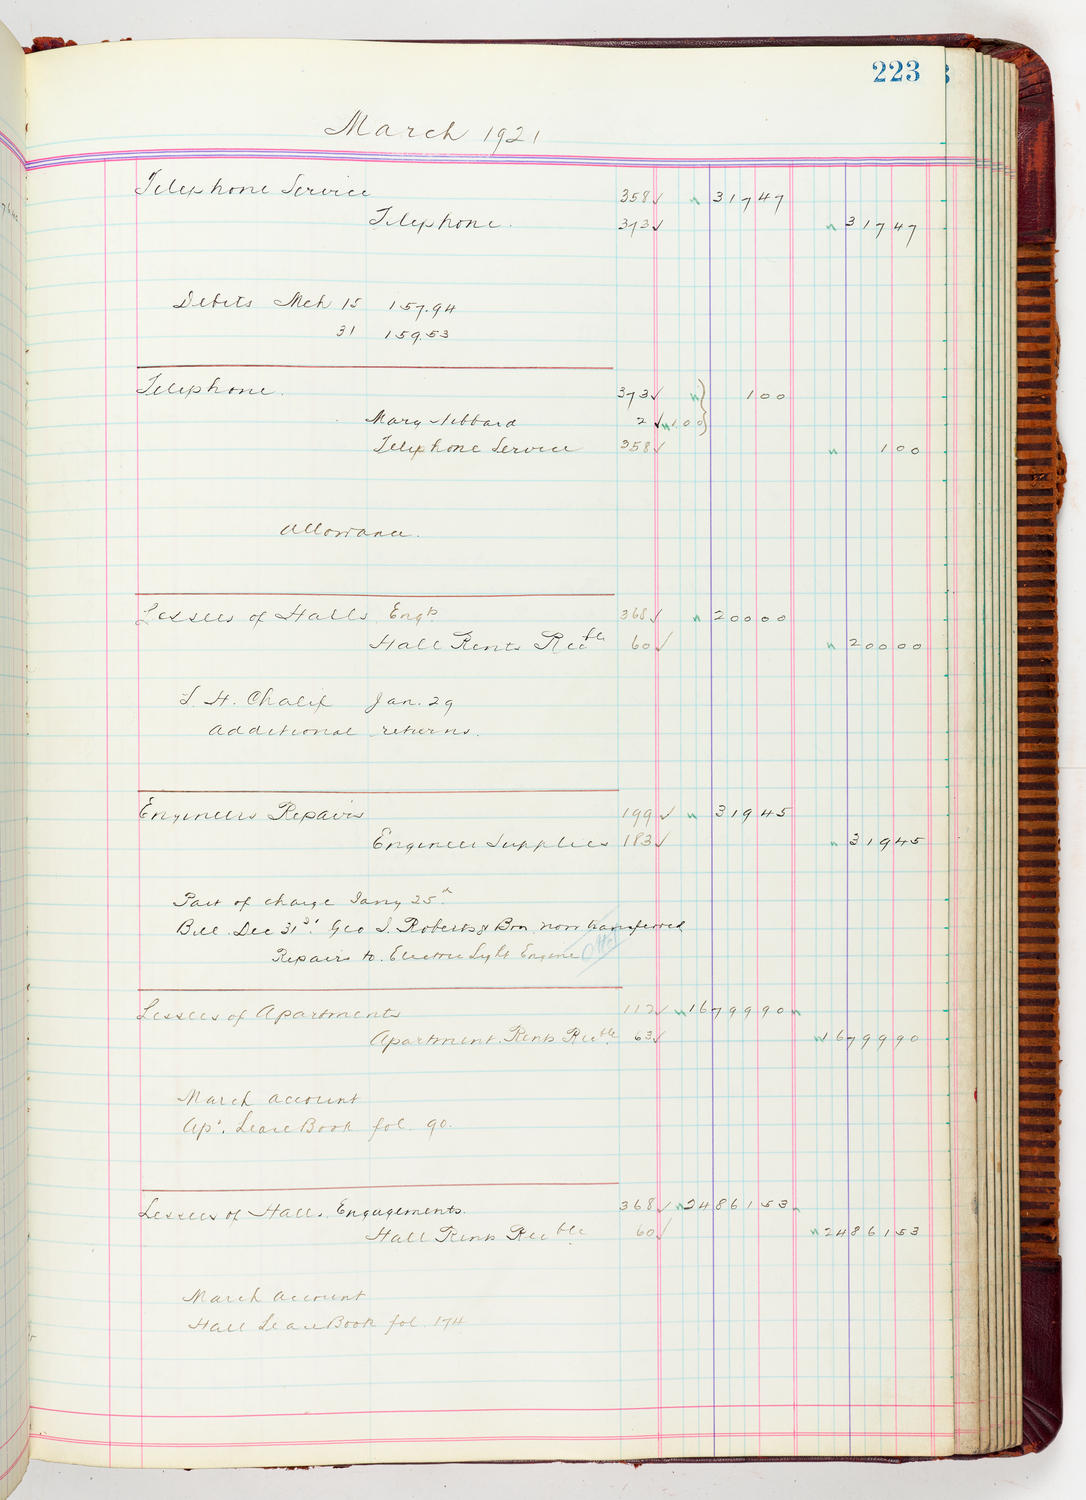 Music Hall Accounting Ledger, volume 5, page 223